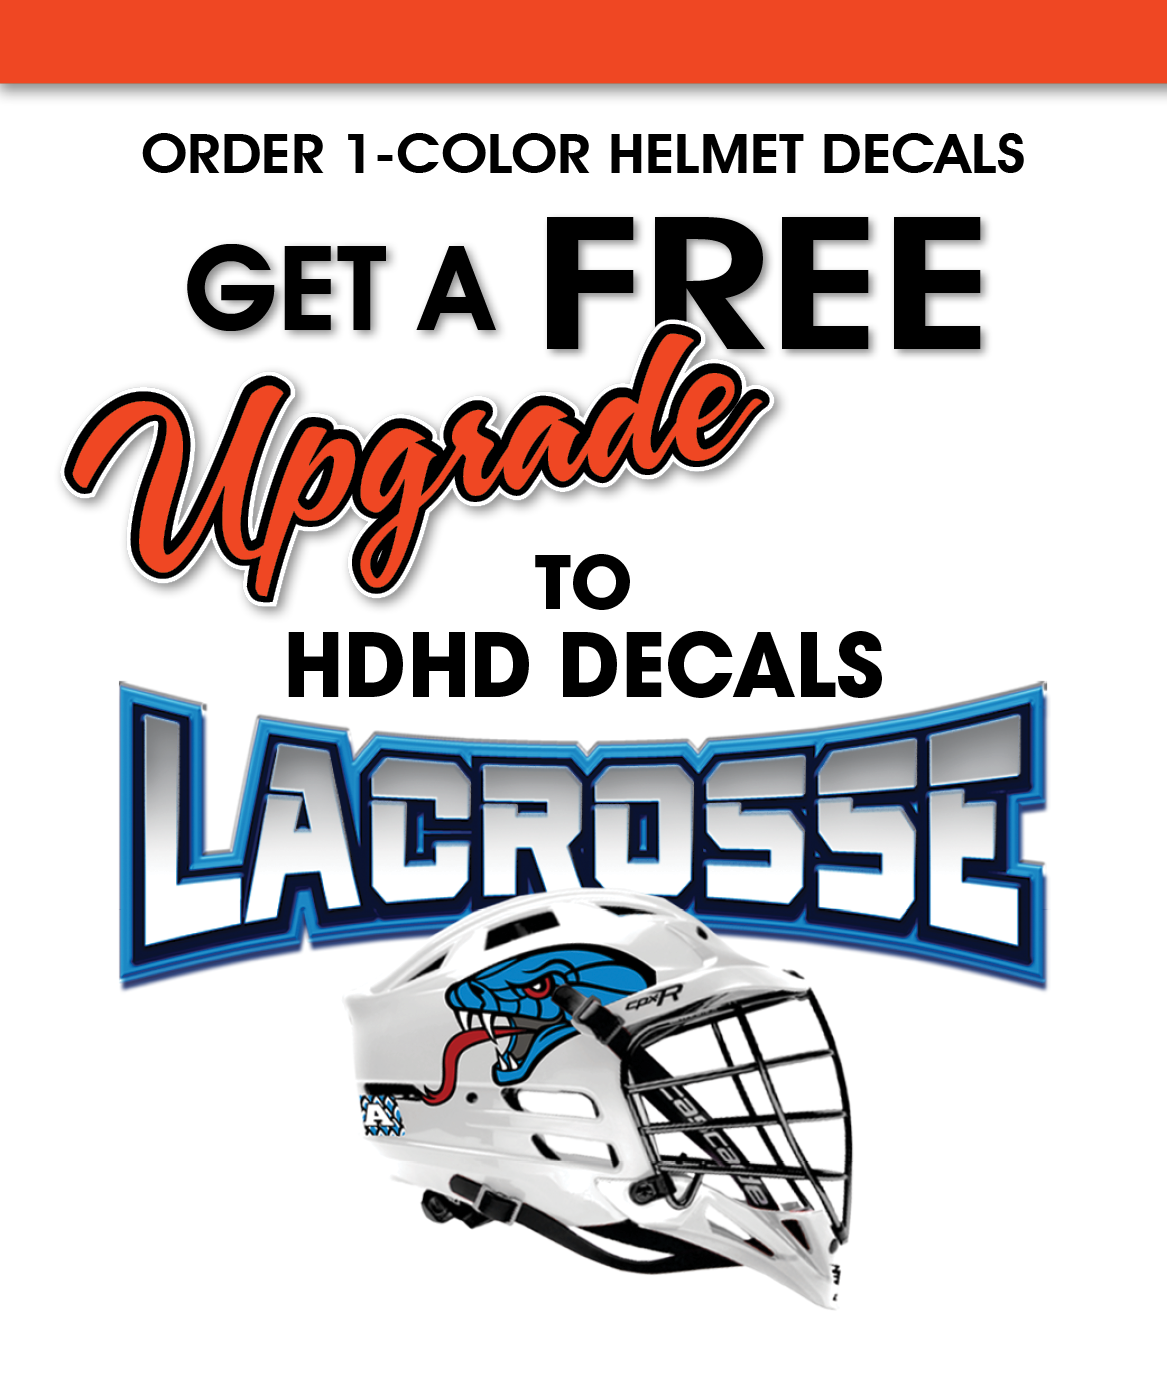 Free Upgrade to HDHD Lacrosse Helmet Decals